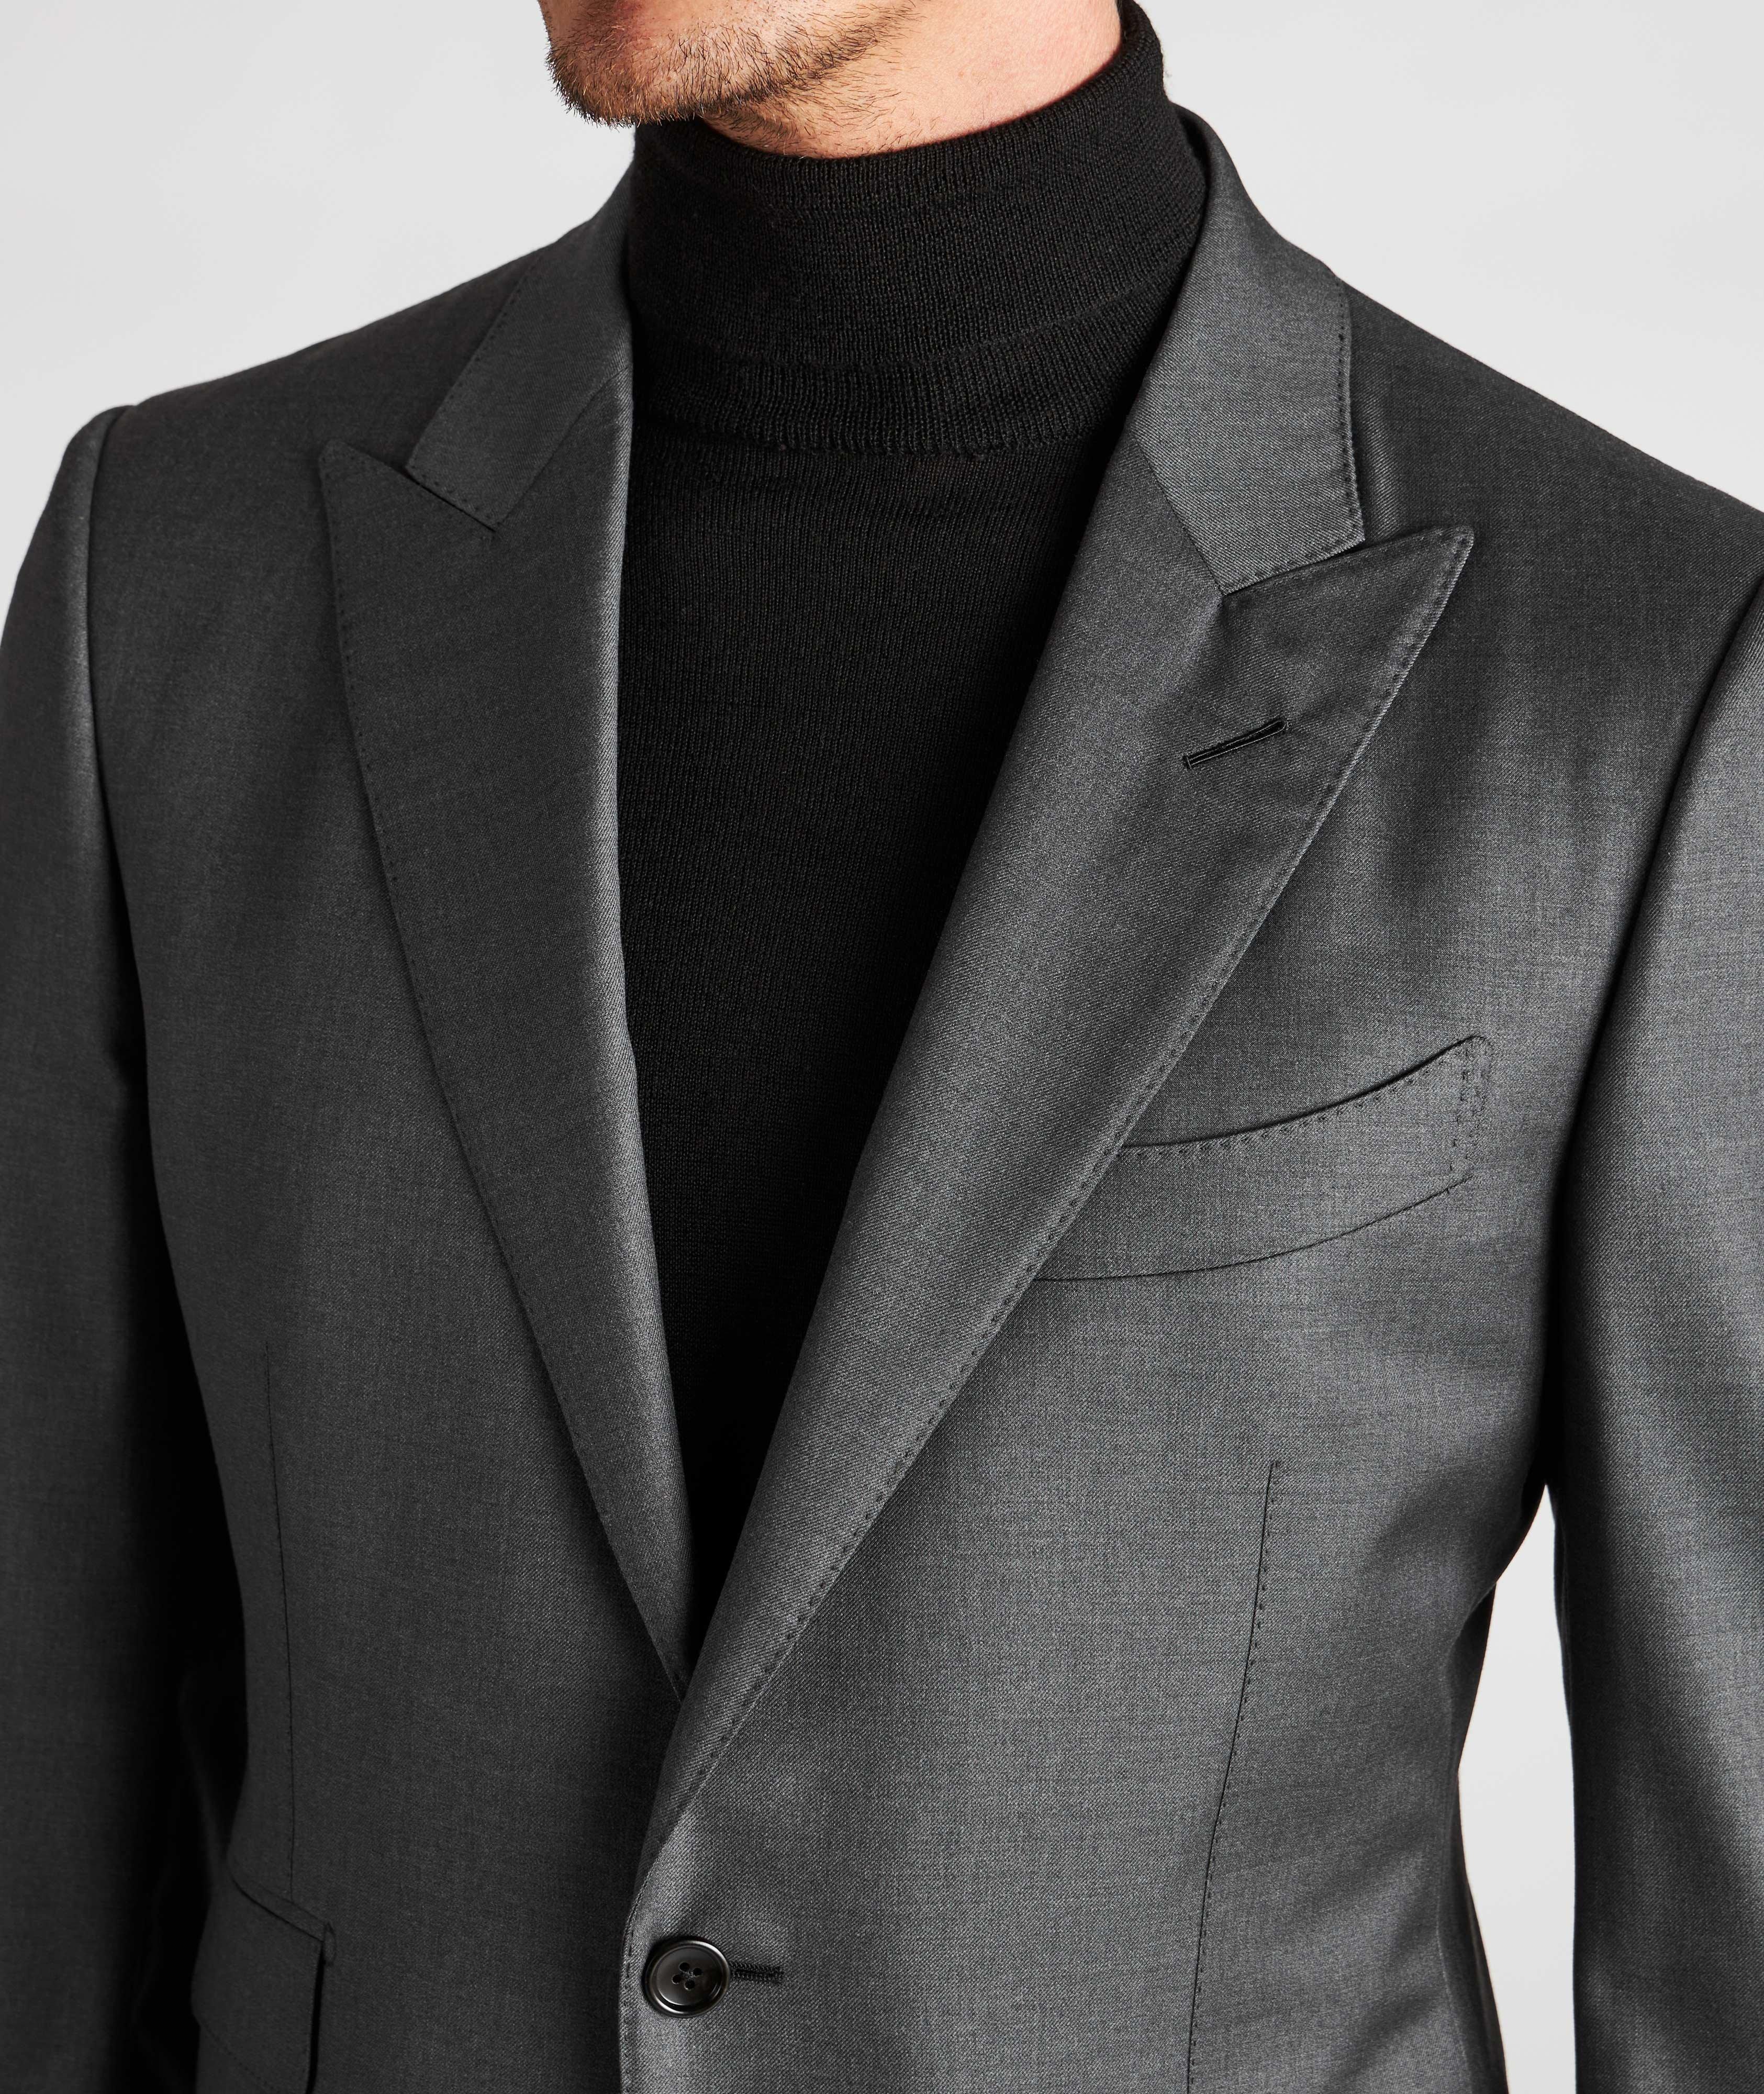 O'Connor Solid Wool Suit image 3